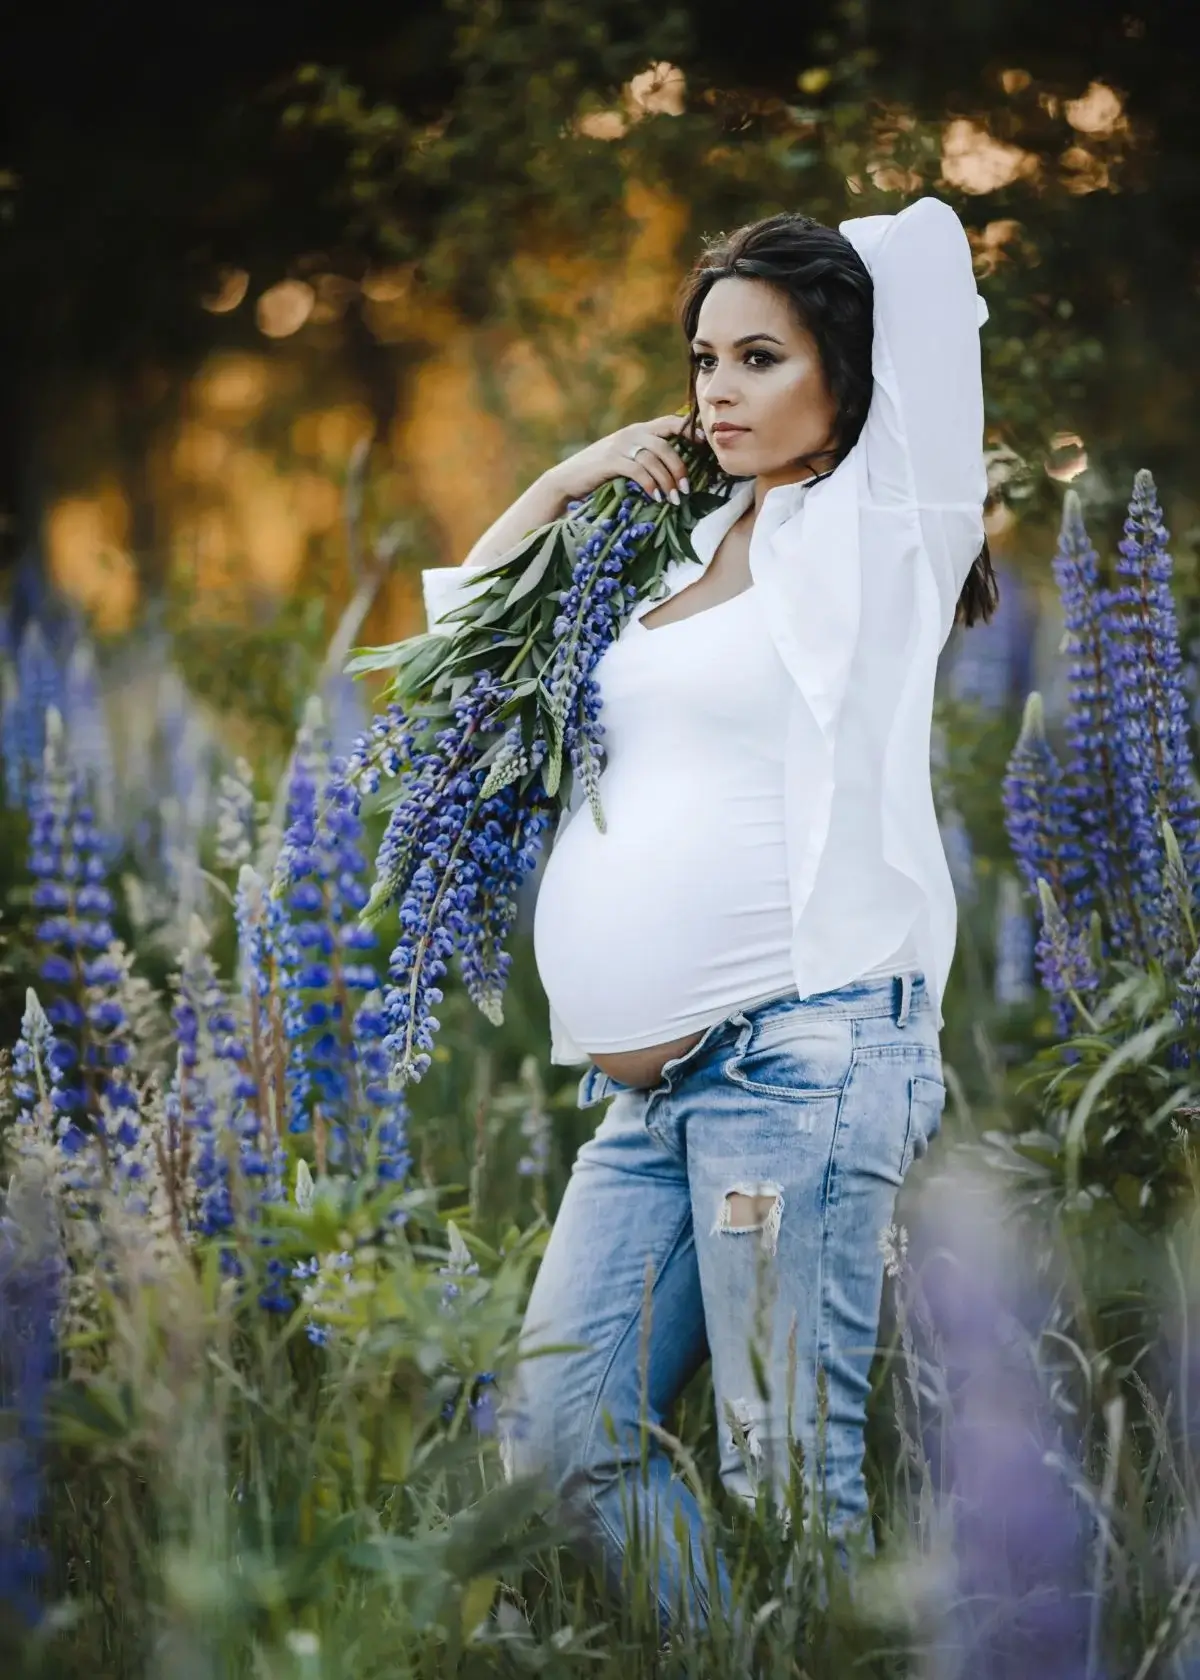 What fabrics are commonly used in maternity jeans?